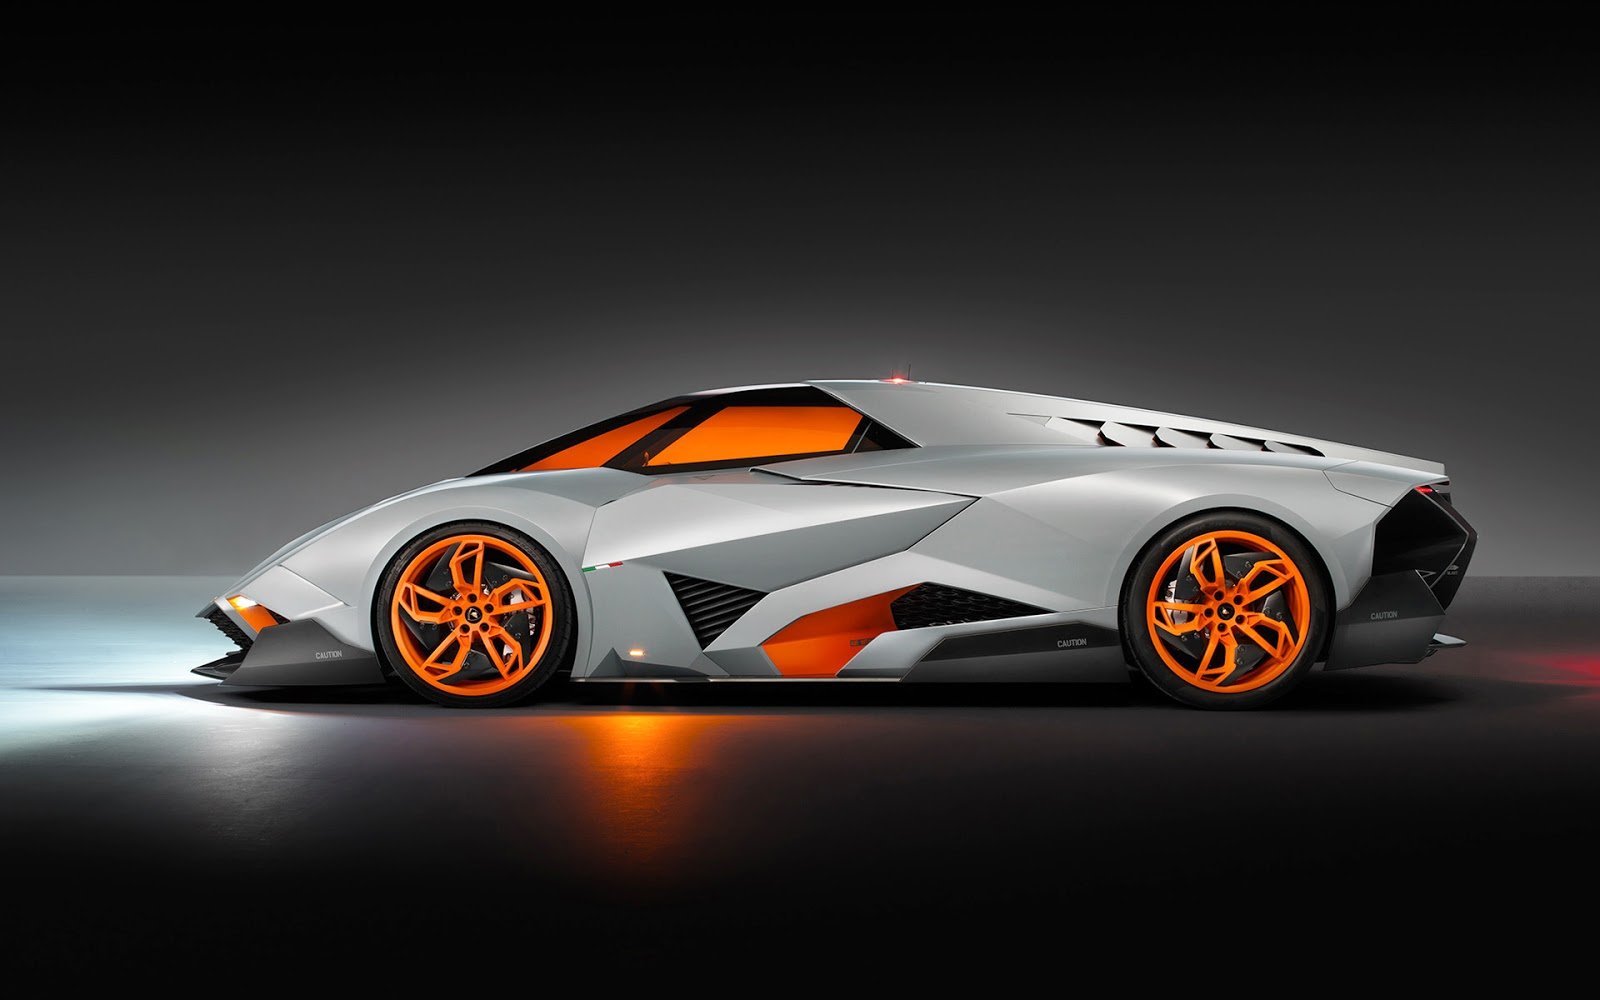  Car Wallpapers 2014 Iphone car fast cool cars sports cars 1600x1000